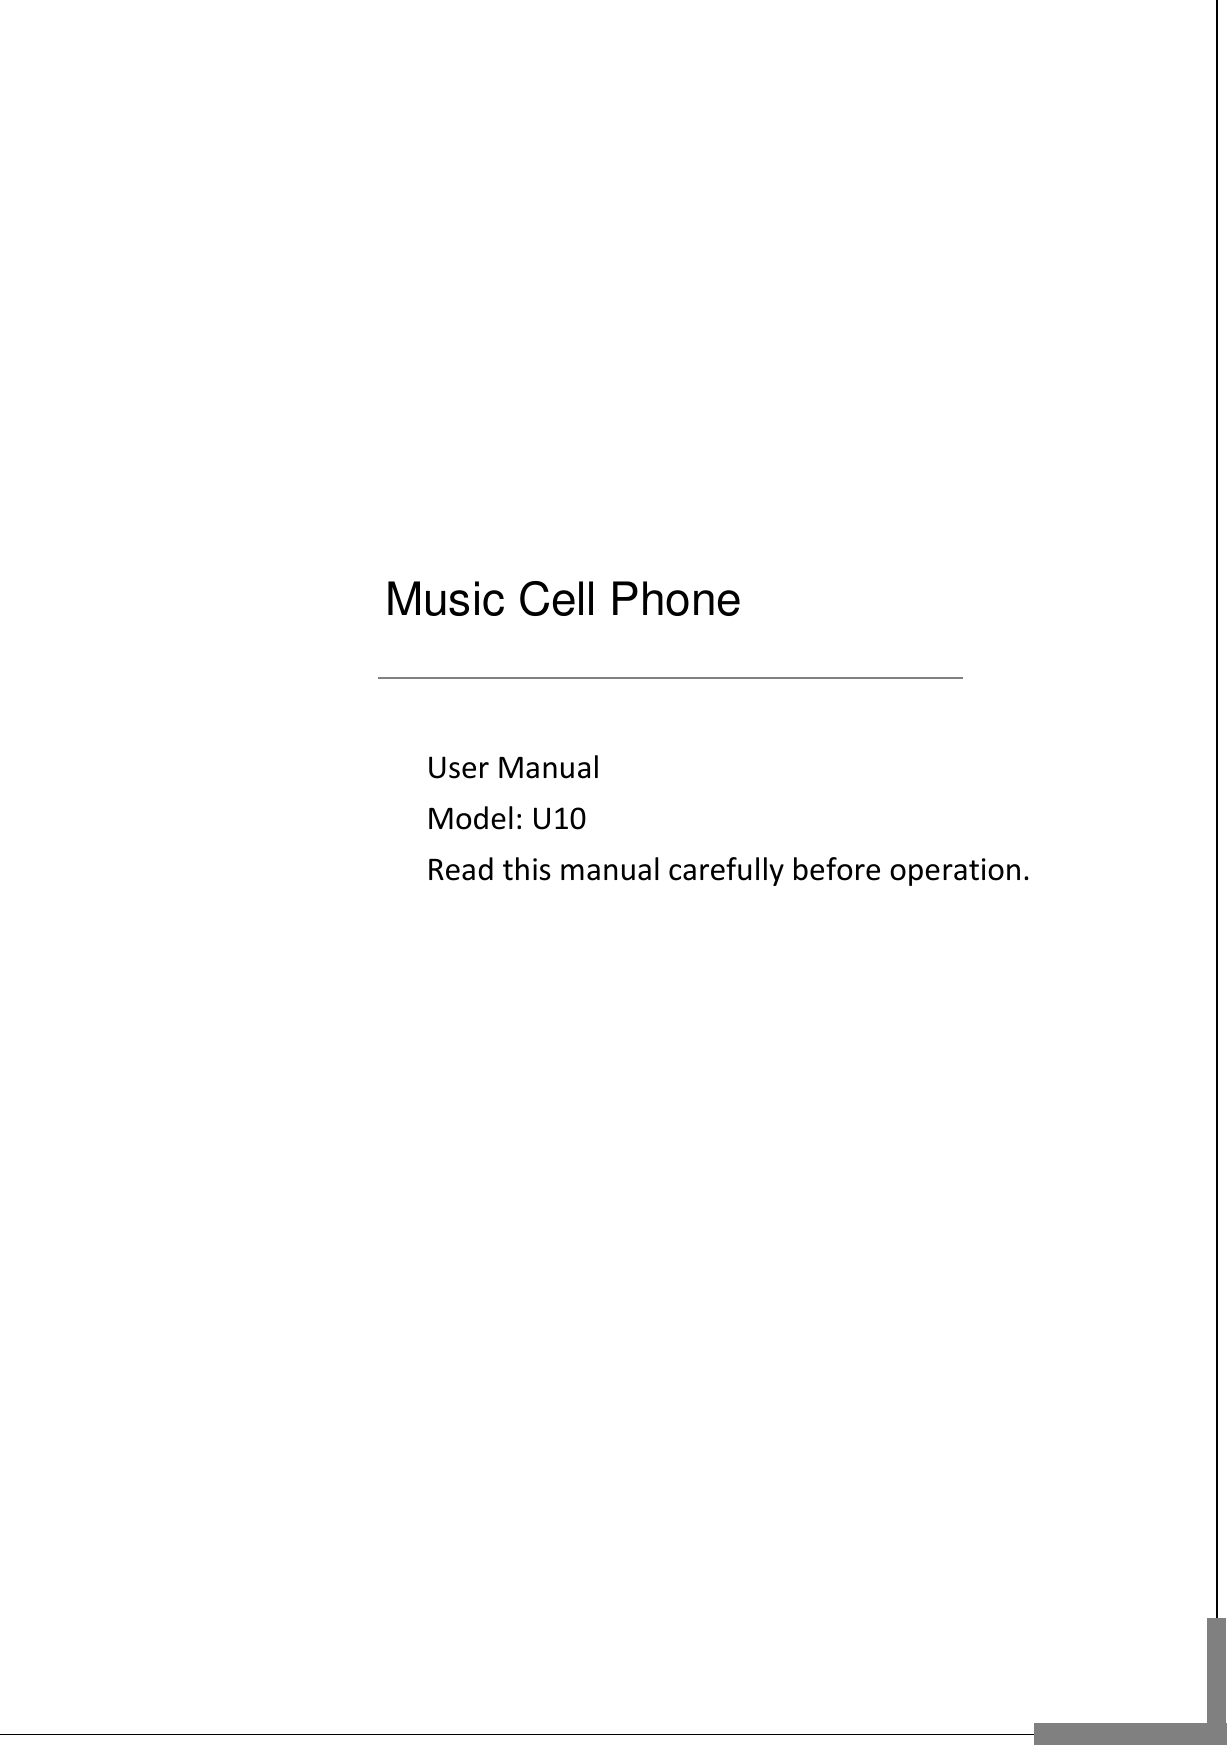                                                                      User Manual                      Model: U10                                           Read this manual carefully before operation.                Music Cell Phone 